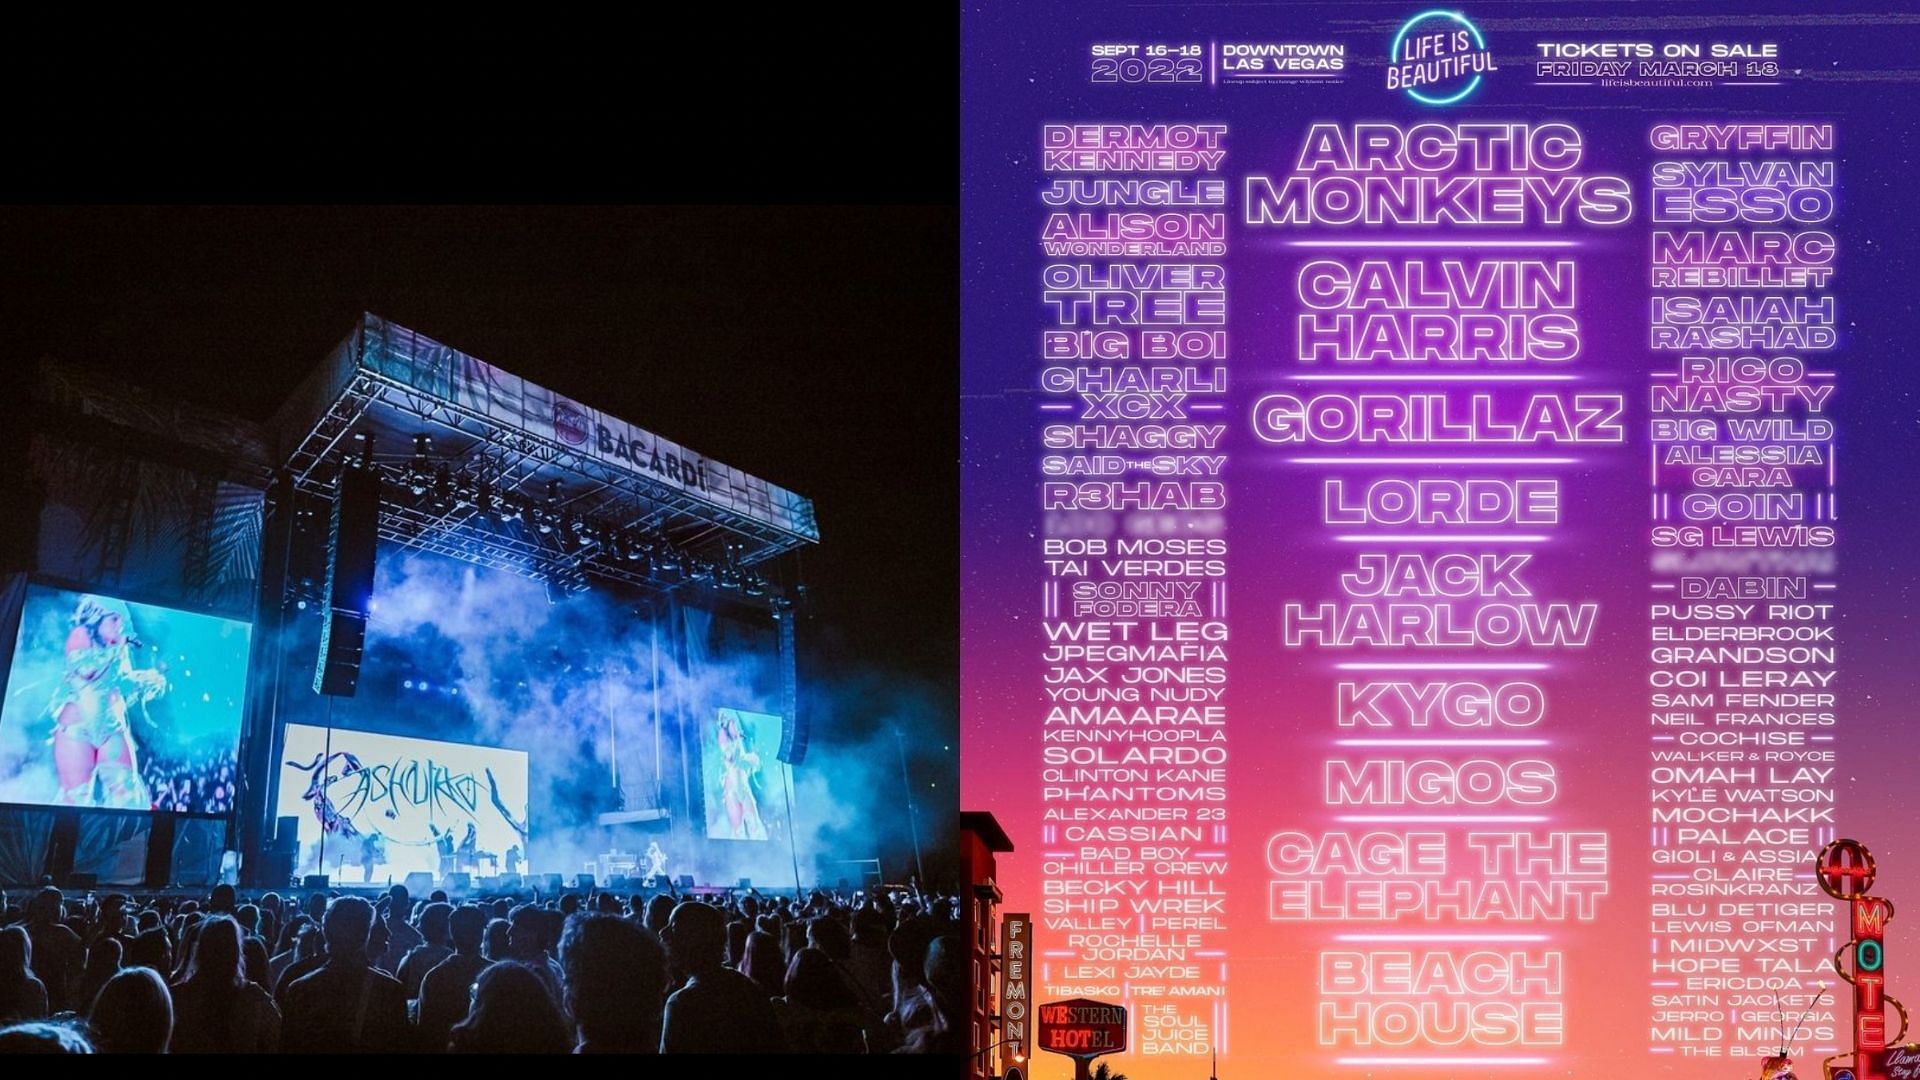 Life is Beautiful festival will be held between September 16 and 18 this year in Downtown Vegas (Images via Instagram / @lifeisbeautiful)